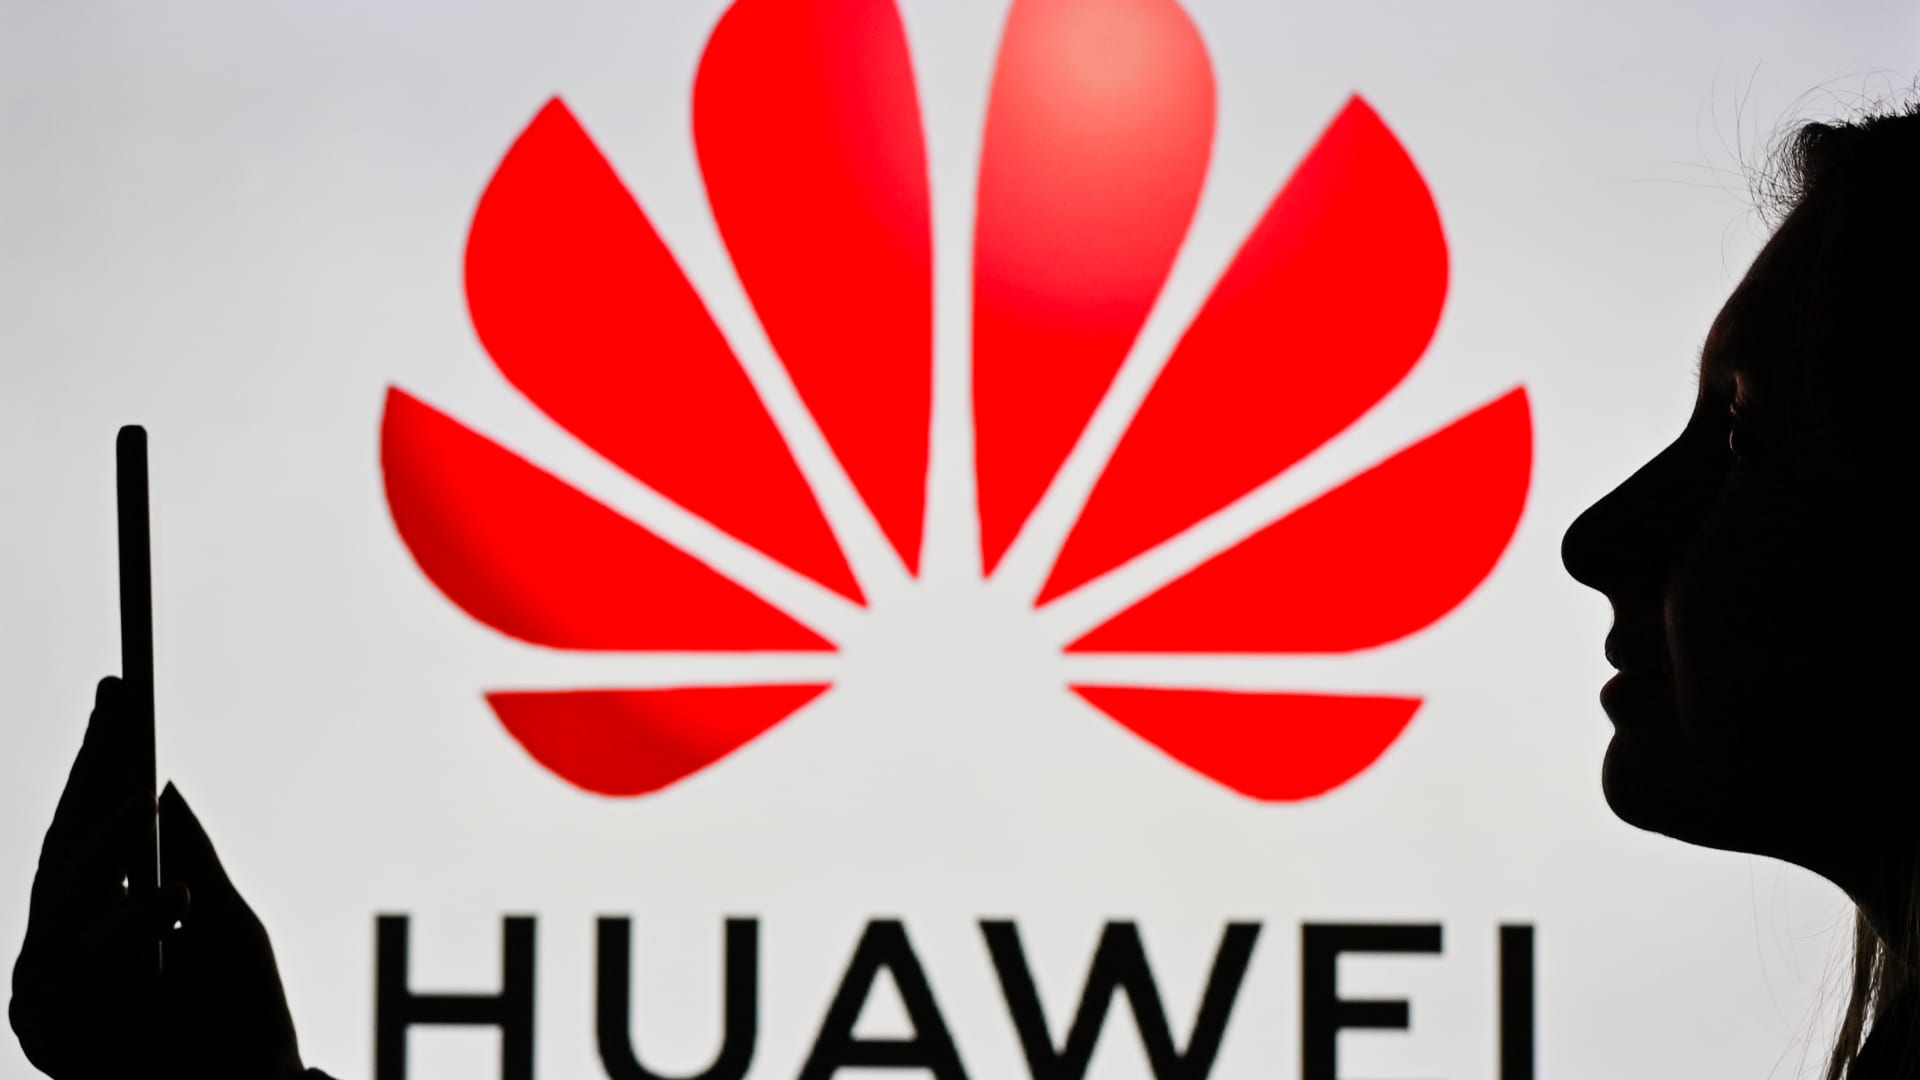 UK extends deadline to remove Huawei from 5G networks after one carrier warned of outages